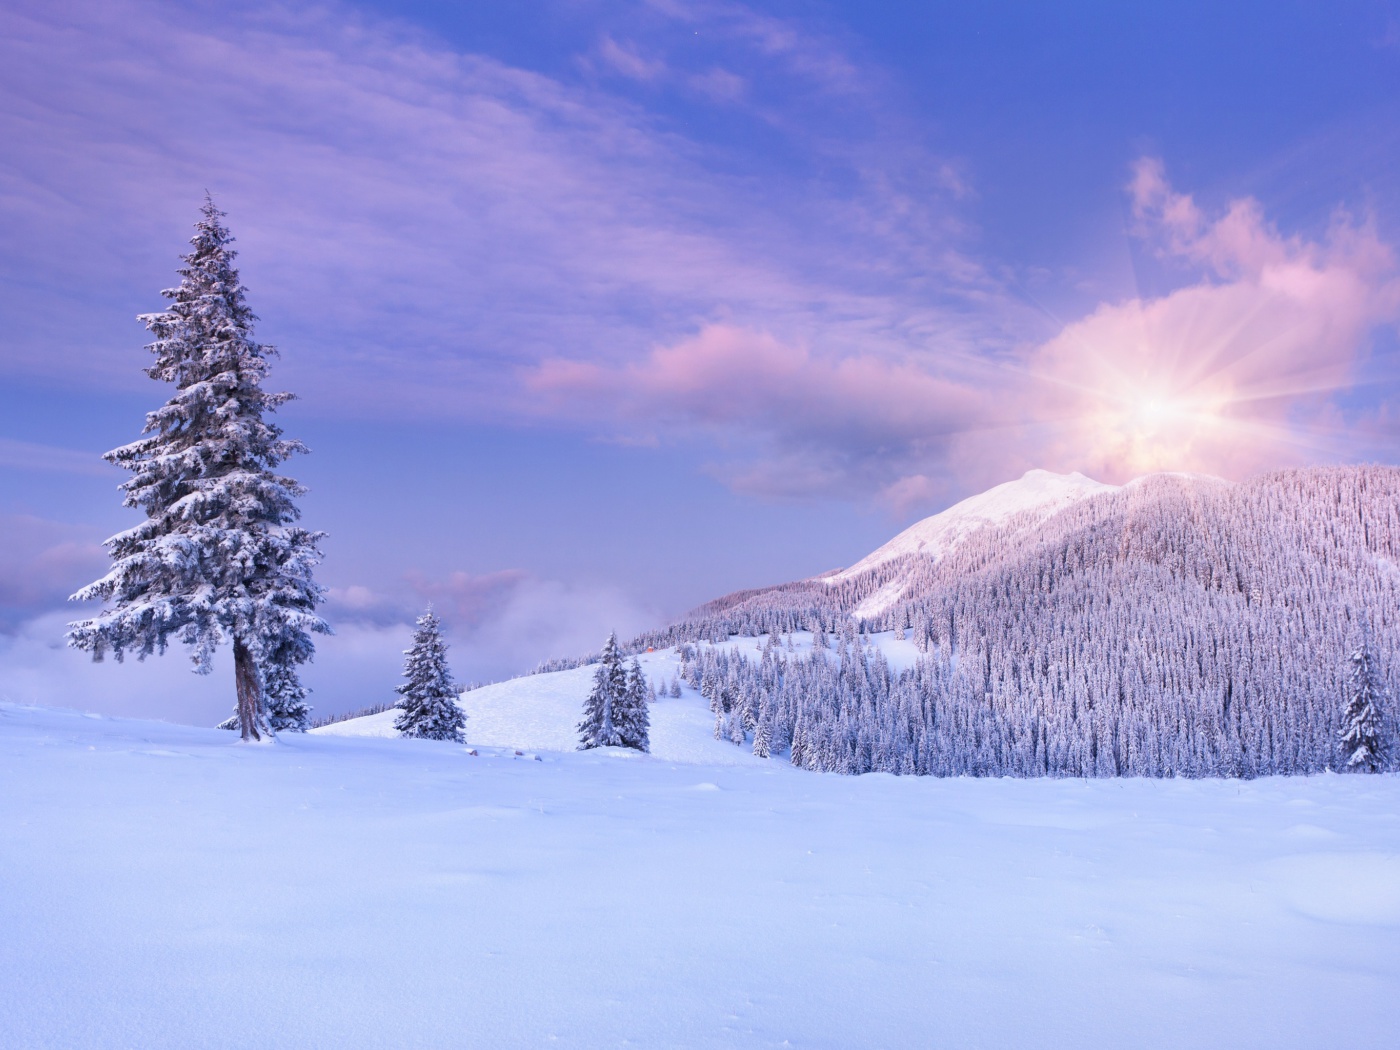 Mountain and Winter Landscape wallpaper 1400x1050